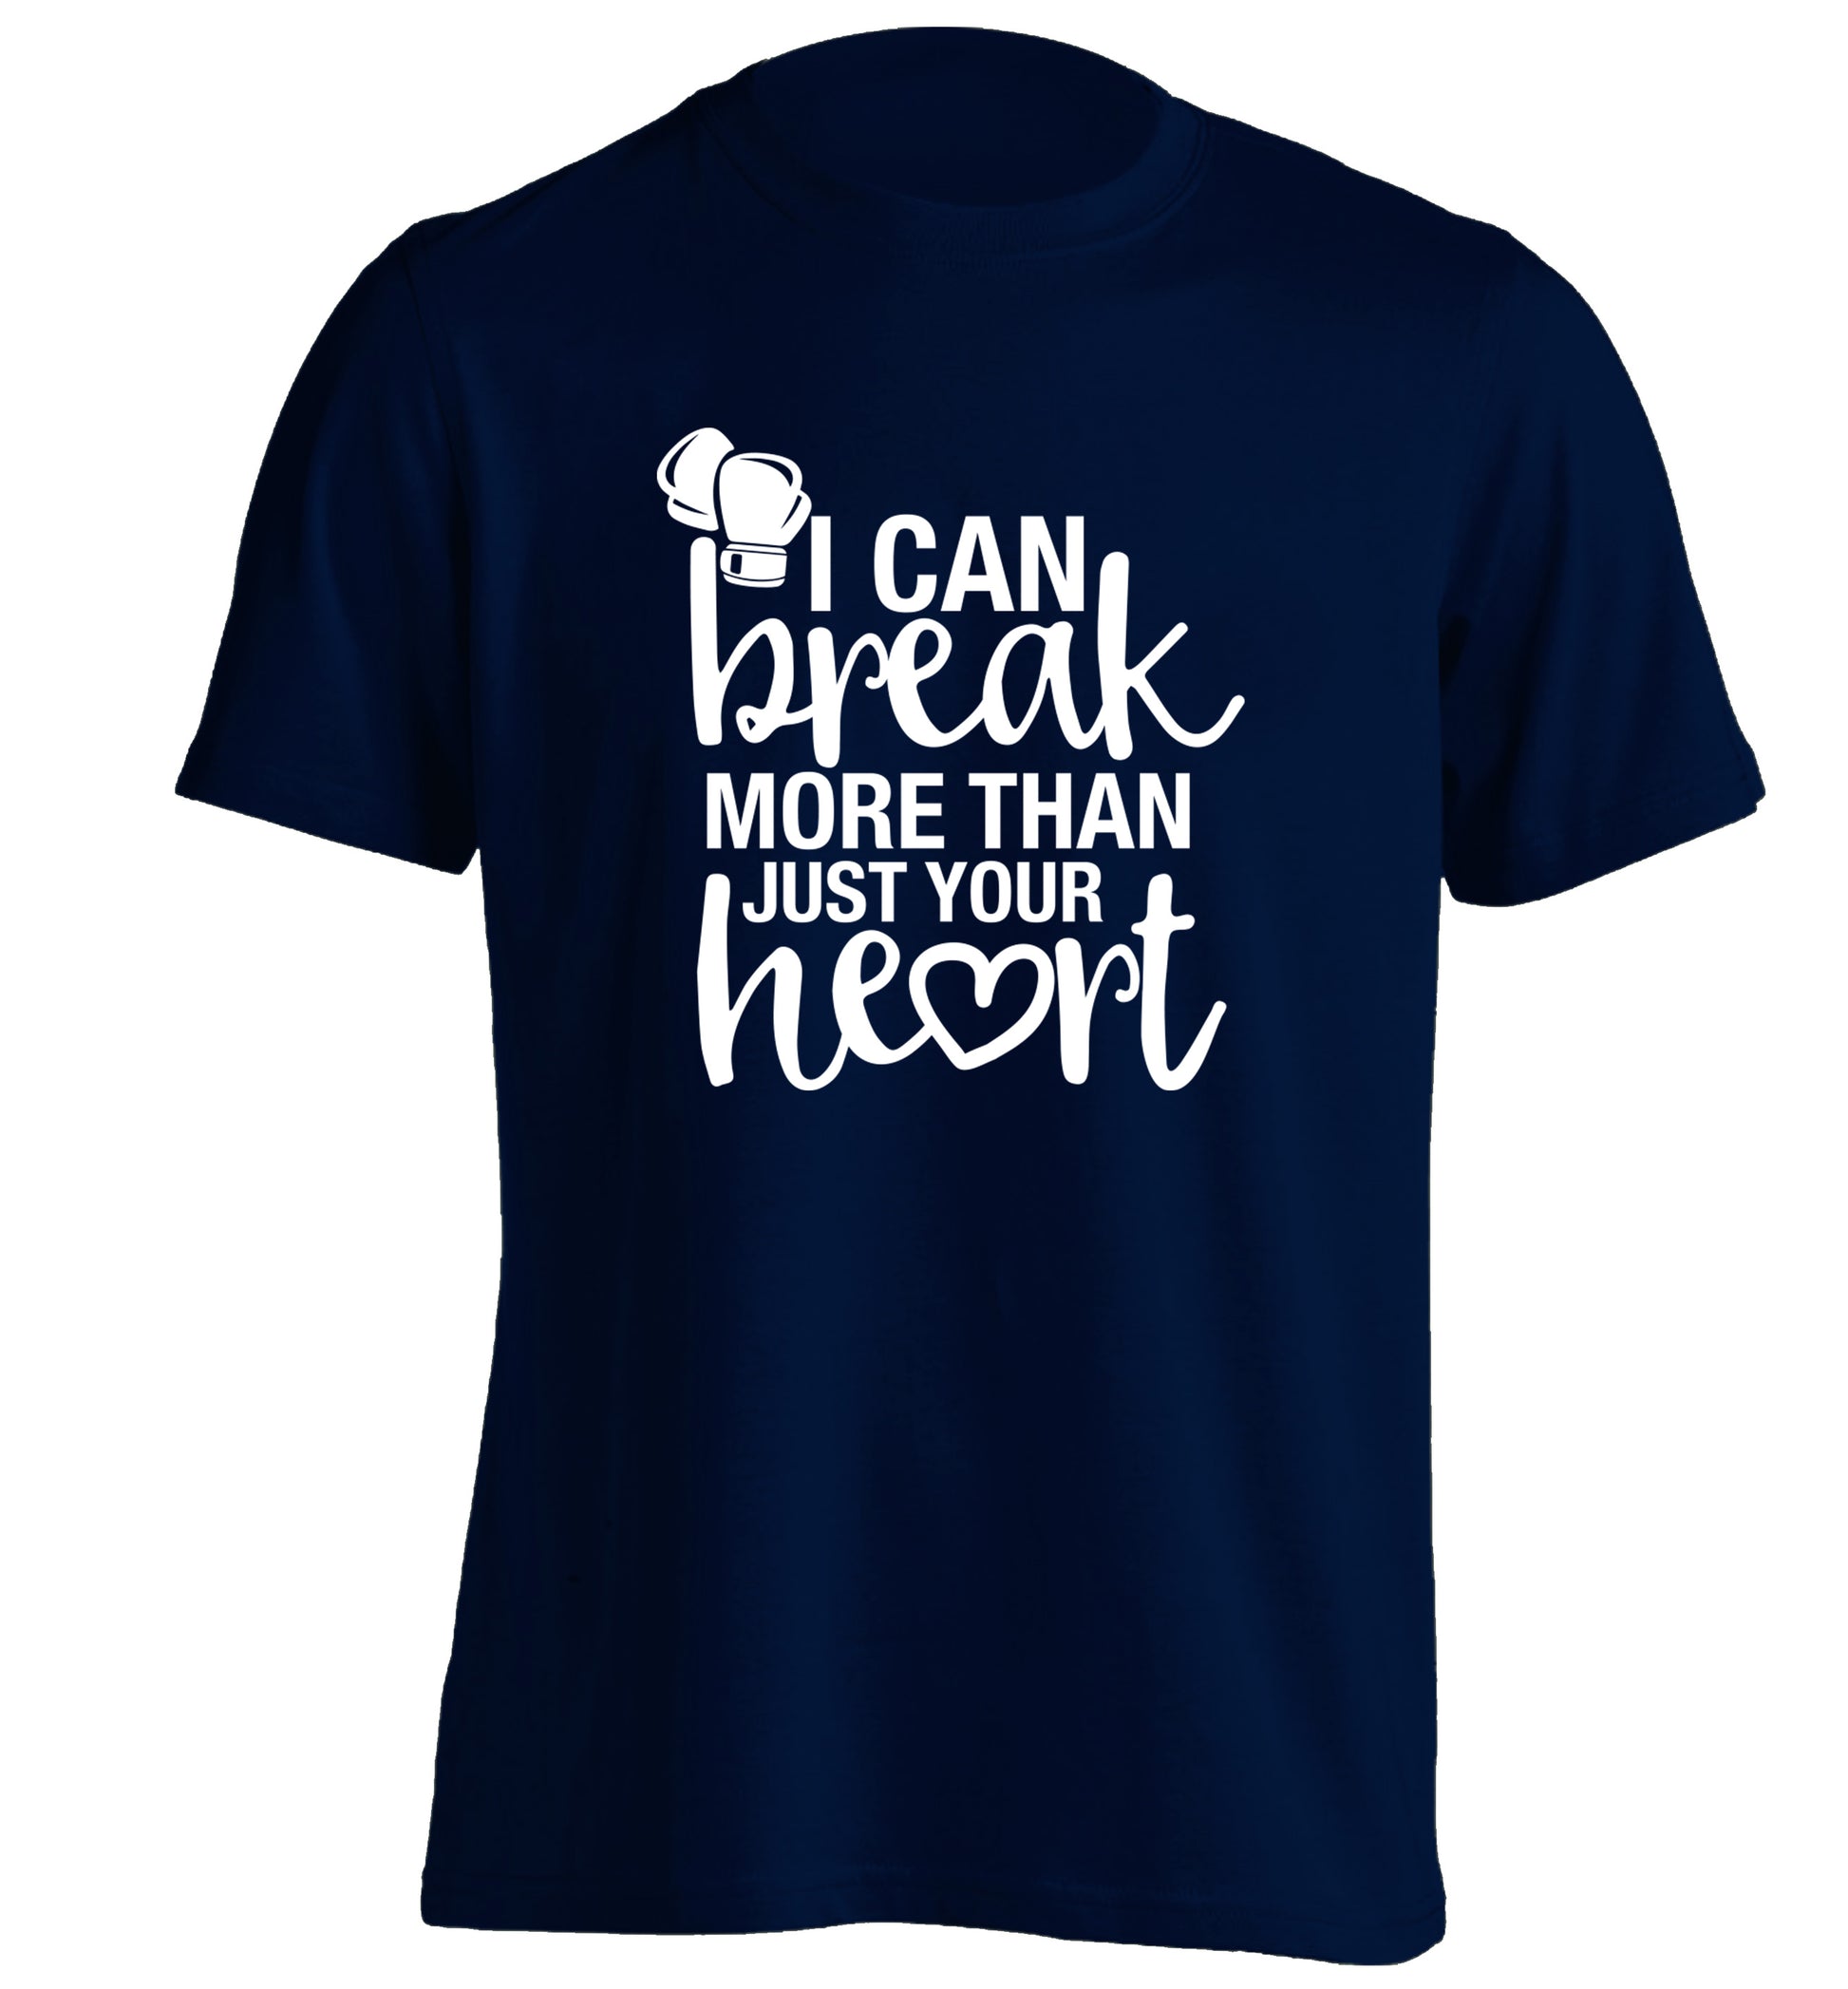 I can break more than just your heart adults unisex navy Tshirt 2XL